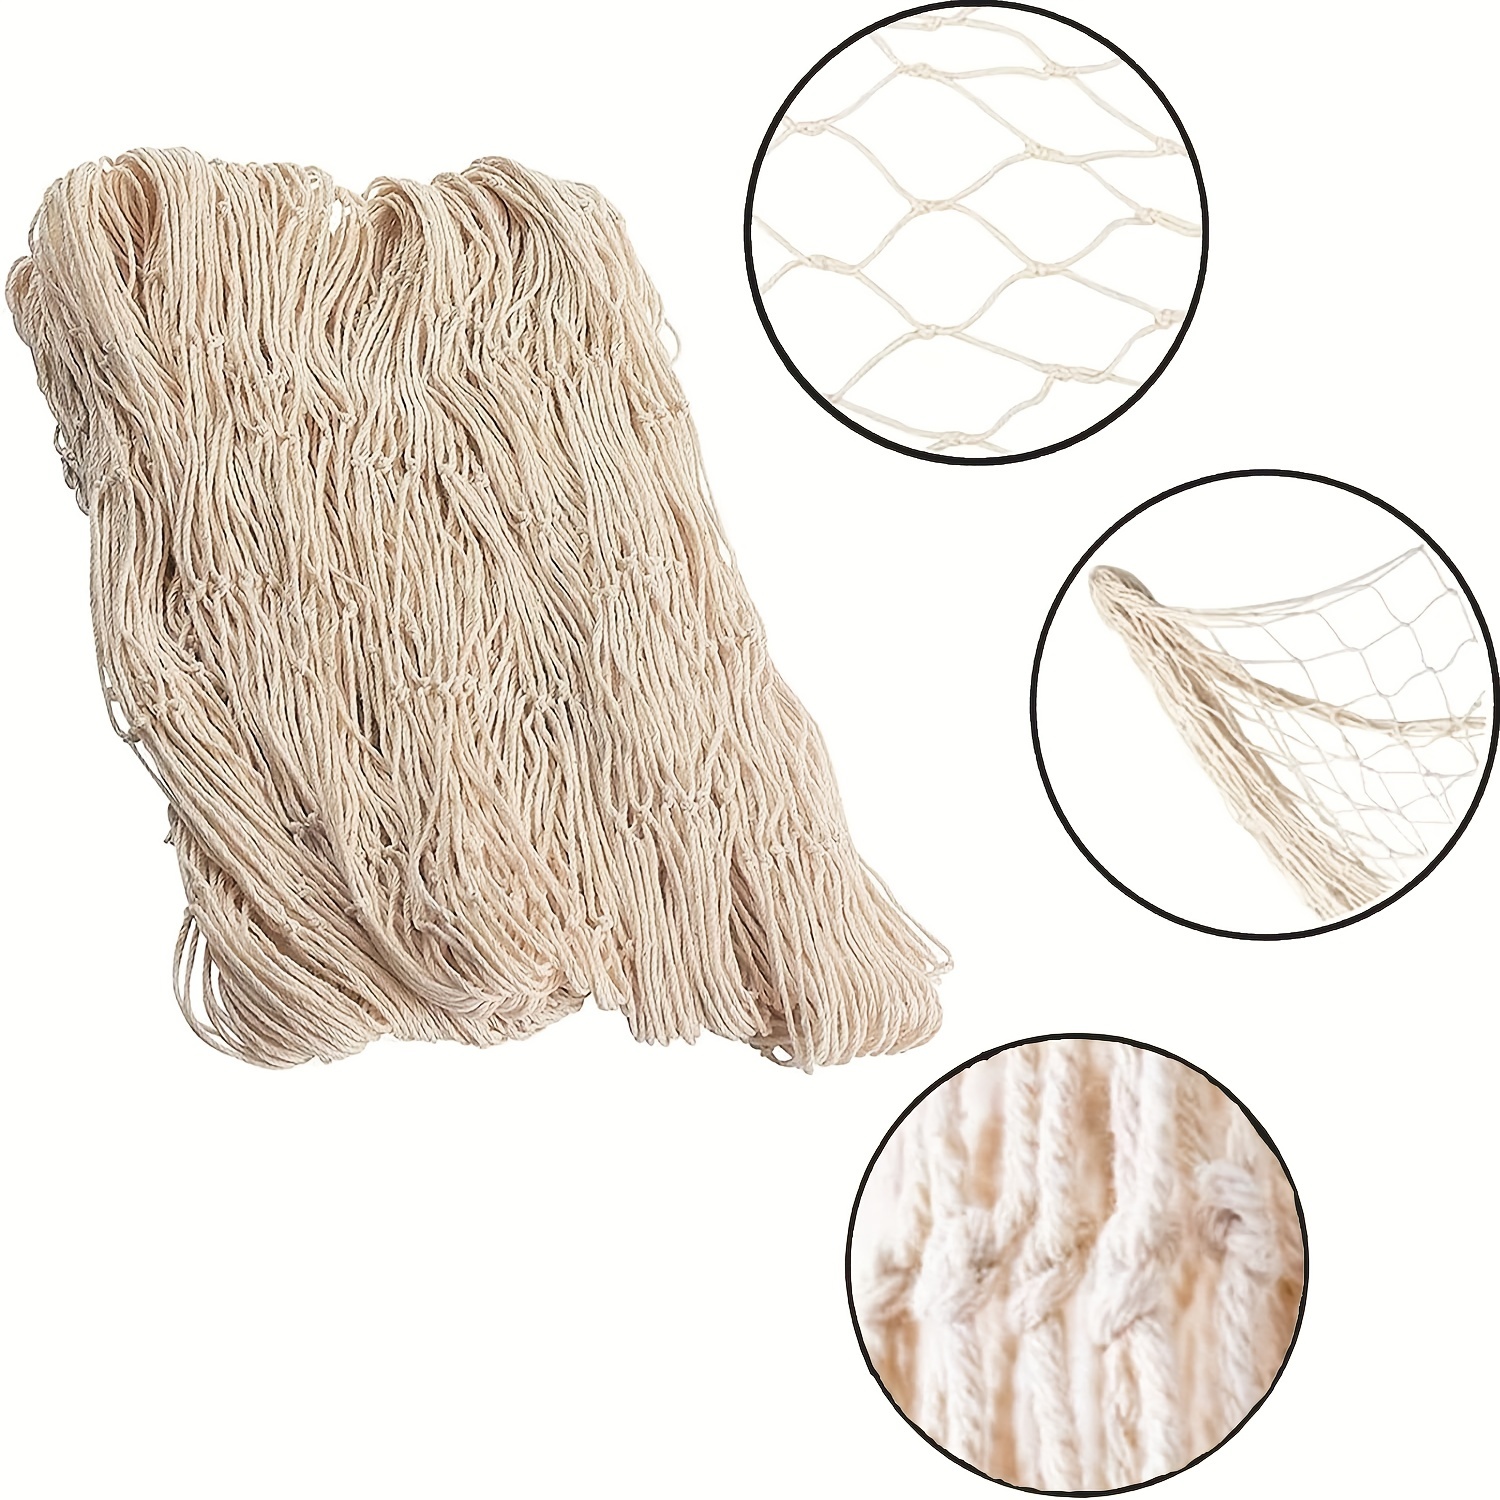 Decorative Fish Net, Fishing Net Decor, 79 x 59inch Ocean Pirate Beach  Theme Party Home Decorations, Mediterranean Style Decor Nautical Decorative  Fish Net with Sea Shells, Color Beige : : Home